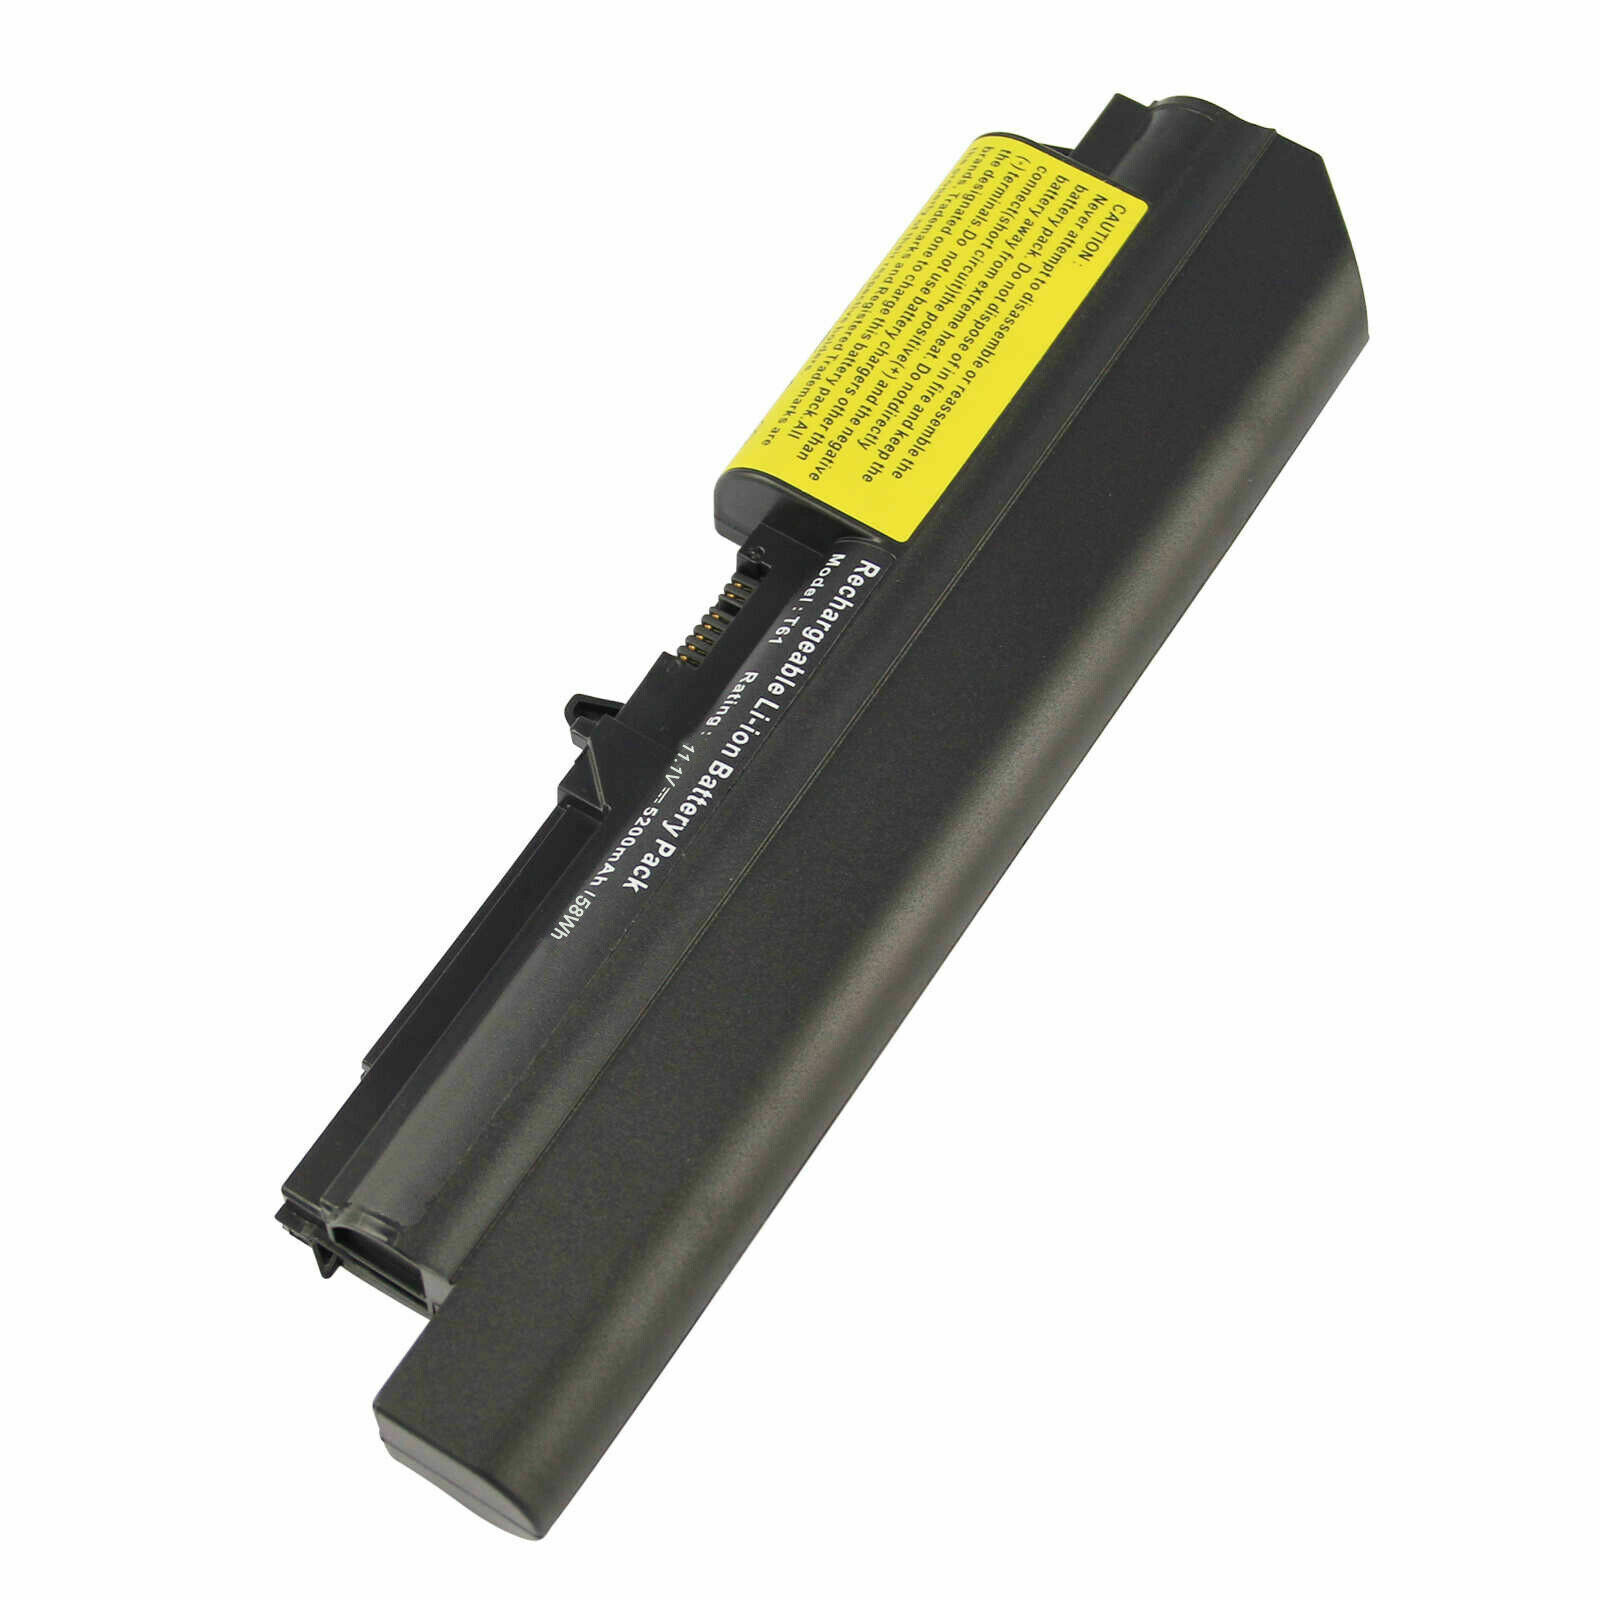 41U3198 Battery for Lenovo ThinkPad R61 T61 T400 R400 Series 14.1" Widescreen - image 2 of 5